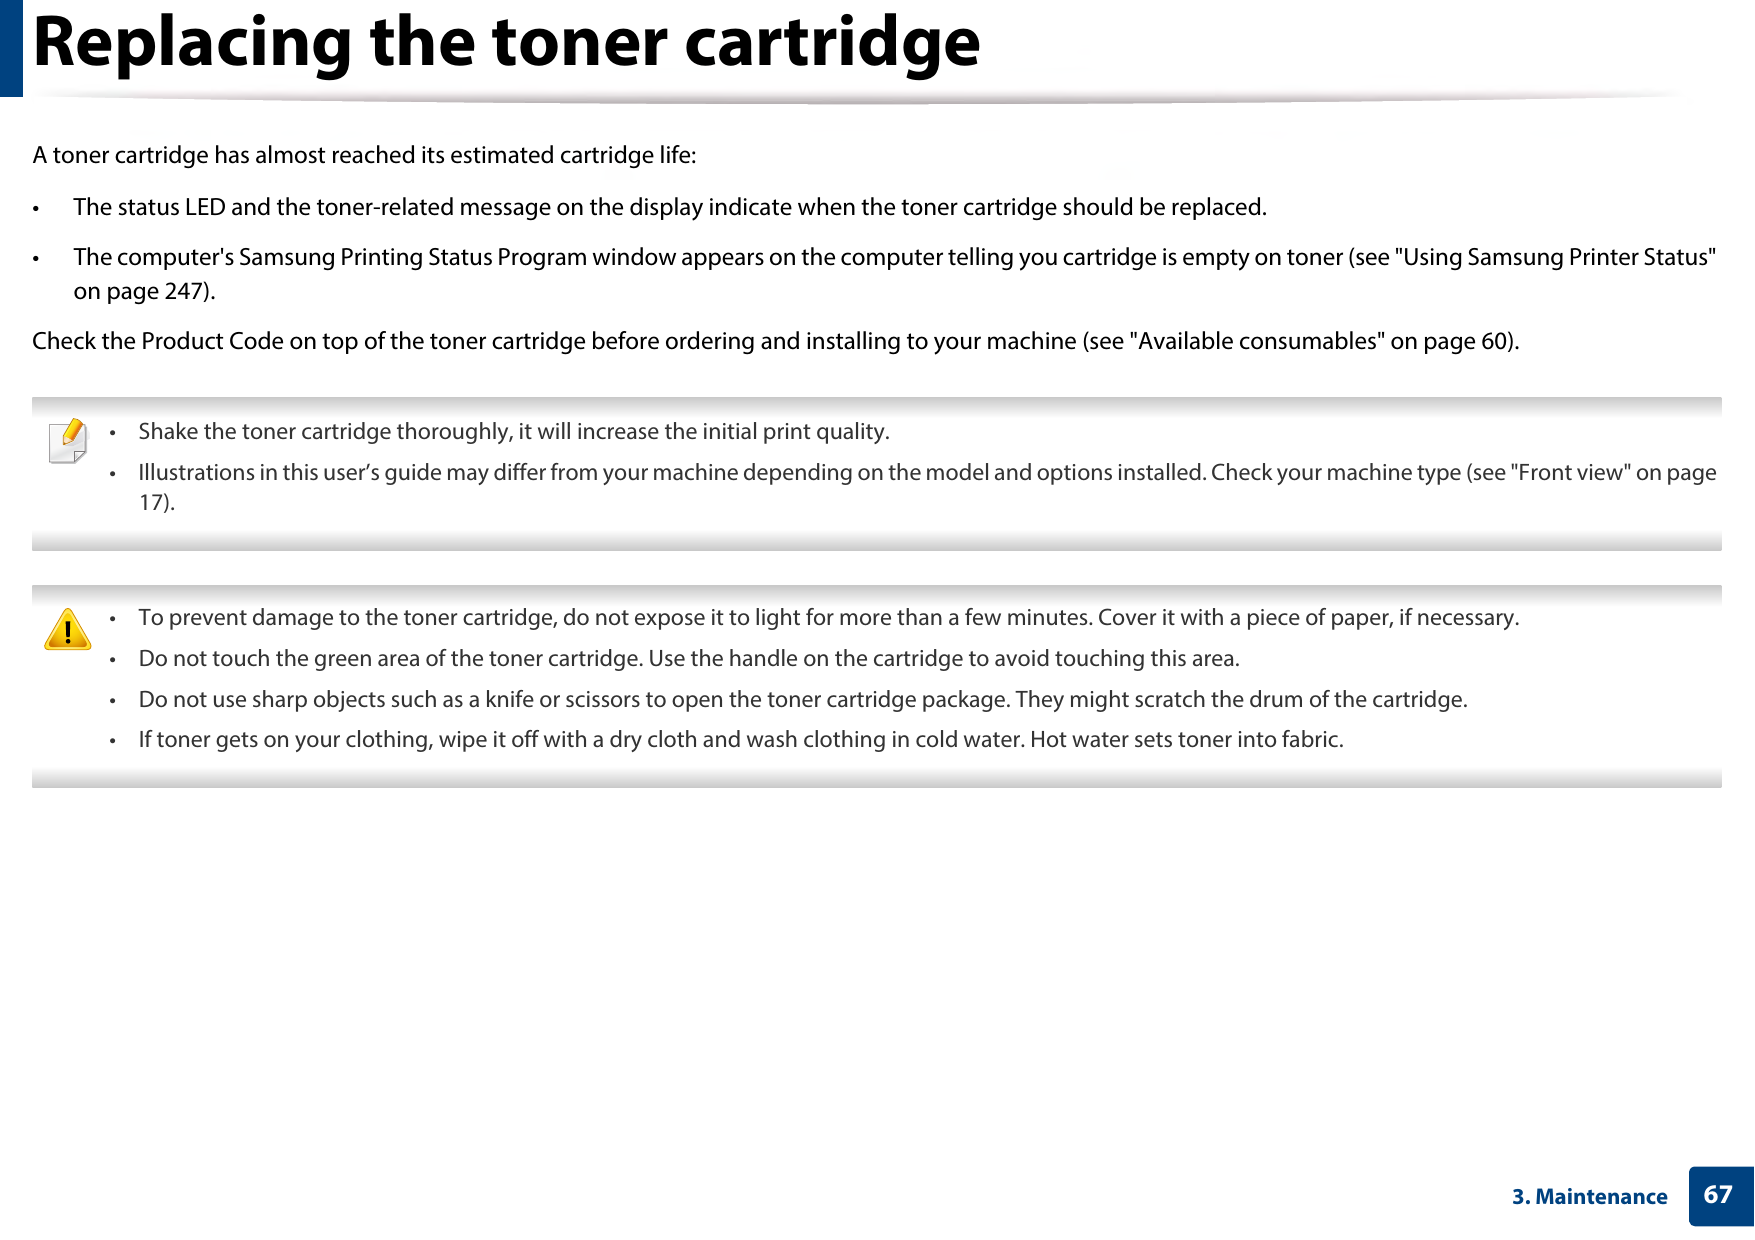 673. MaintenanceReplacing the toner cartridgeA toner cartridge has almost reached its estimated cartridge life:• The status LED and the toner-related message on the display indicate when the toner cartridge should be replaced.• The computer&apos;s Samsung Printing Status Program window appears on the computer telling you cartridge is empty on toner (see &quot;Using Samsung Printer Status&quot; on page 247).Check the Product Code on top of the toner cartridge before ordering and installing to your machine (see &quot;Available consumables&quot; on page 60). • Shake the toner cartridge thoroughly, it will increase the initial print quality.• Illustrations in this user’s guide may differ from your machine depending on the model and options installed. Check your machine type (see &quot;Front view&quot; on page 17).  • To prevent damage to the toner cartridge, do not expose it to light for more than a few minutes. Cover it with a piece of paper, if necessary. • Do not touch the green area of the toner cartridge. Use the handle on the cartridge to avoid touching this area. • Do not use sharp objects such as a knife or scissors to open the toner cartridge package. They might scratch the drum of the cartridge.• If toner gets on your clothing, wipe it off with a dry cloth and wash clothing in cold water. Hot water sets toner into fabric. 